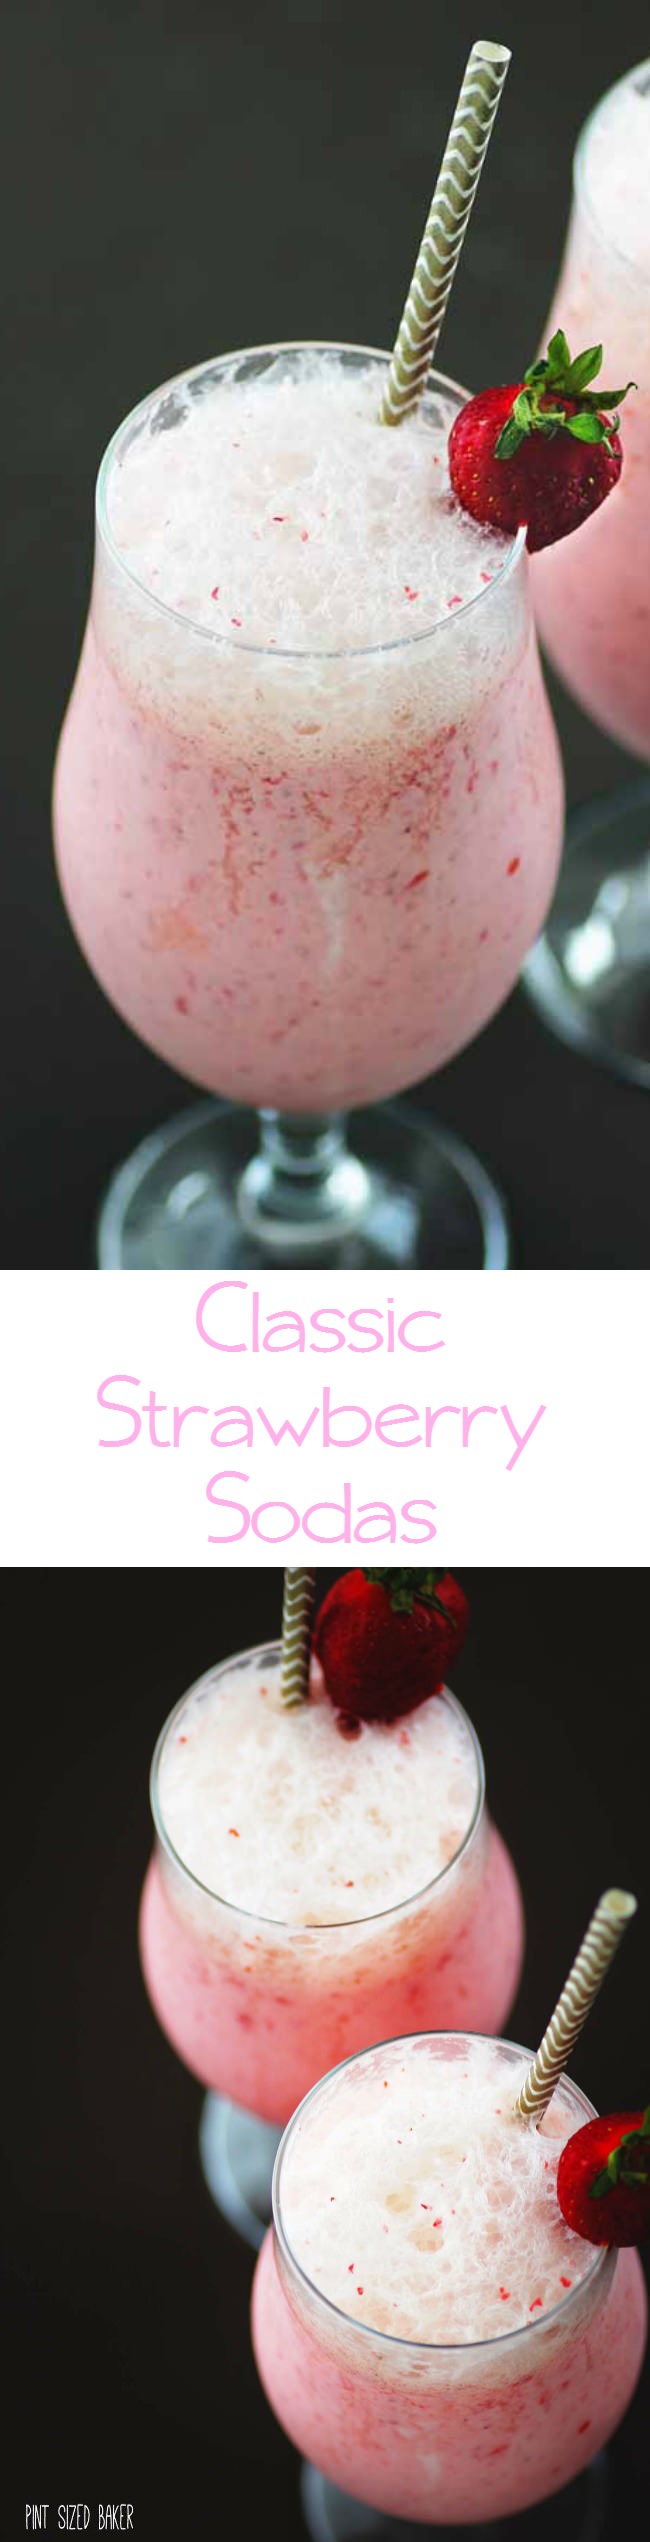 Cool and refreshing! Bring back the good old days with this easy Old Fashioned Strawberry Soda. Made with real strawberries and soda.